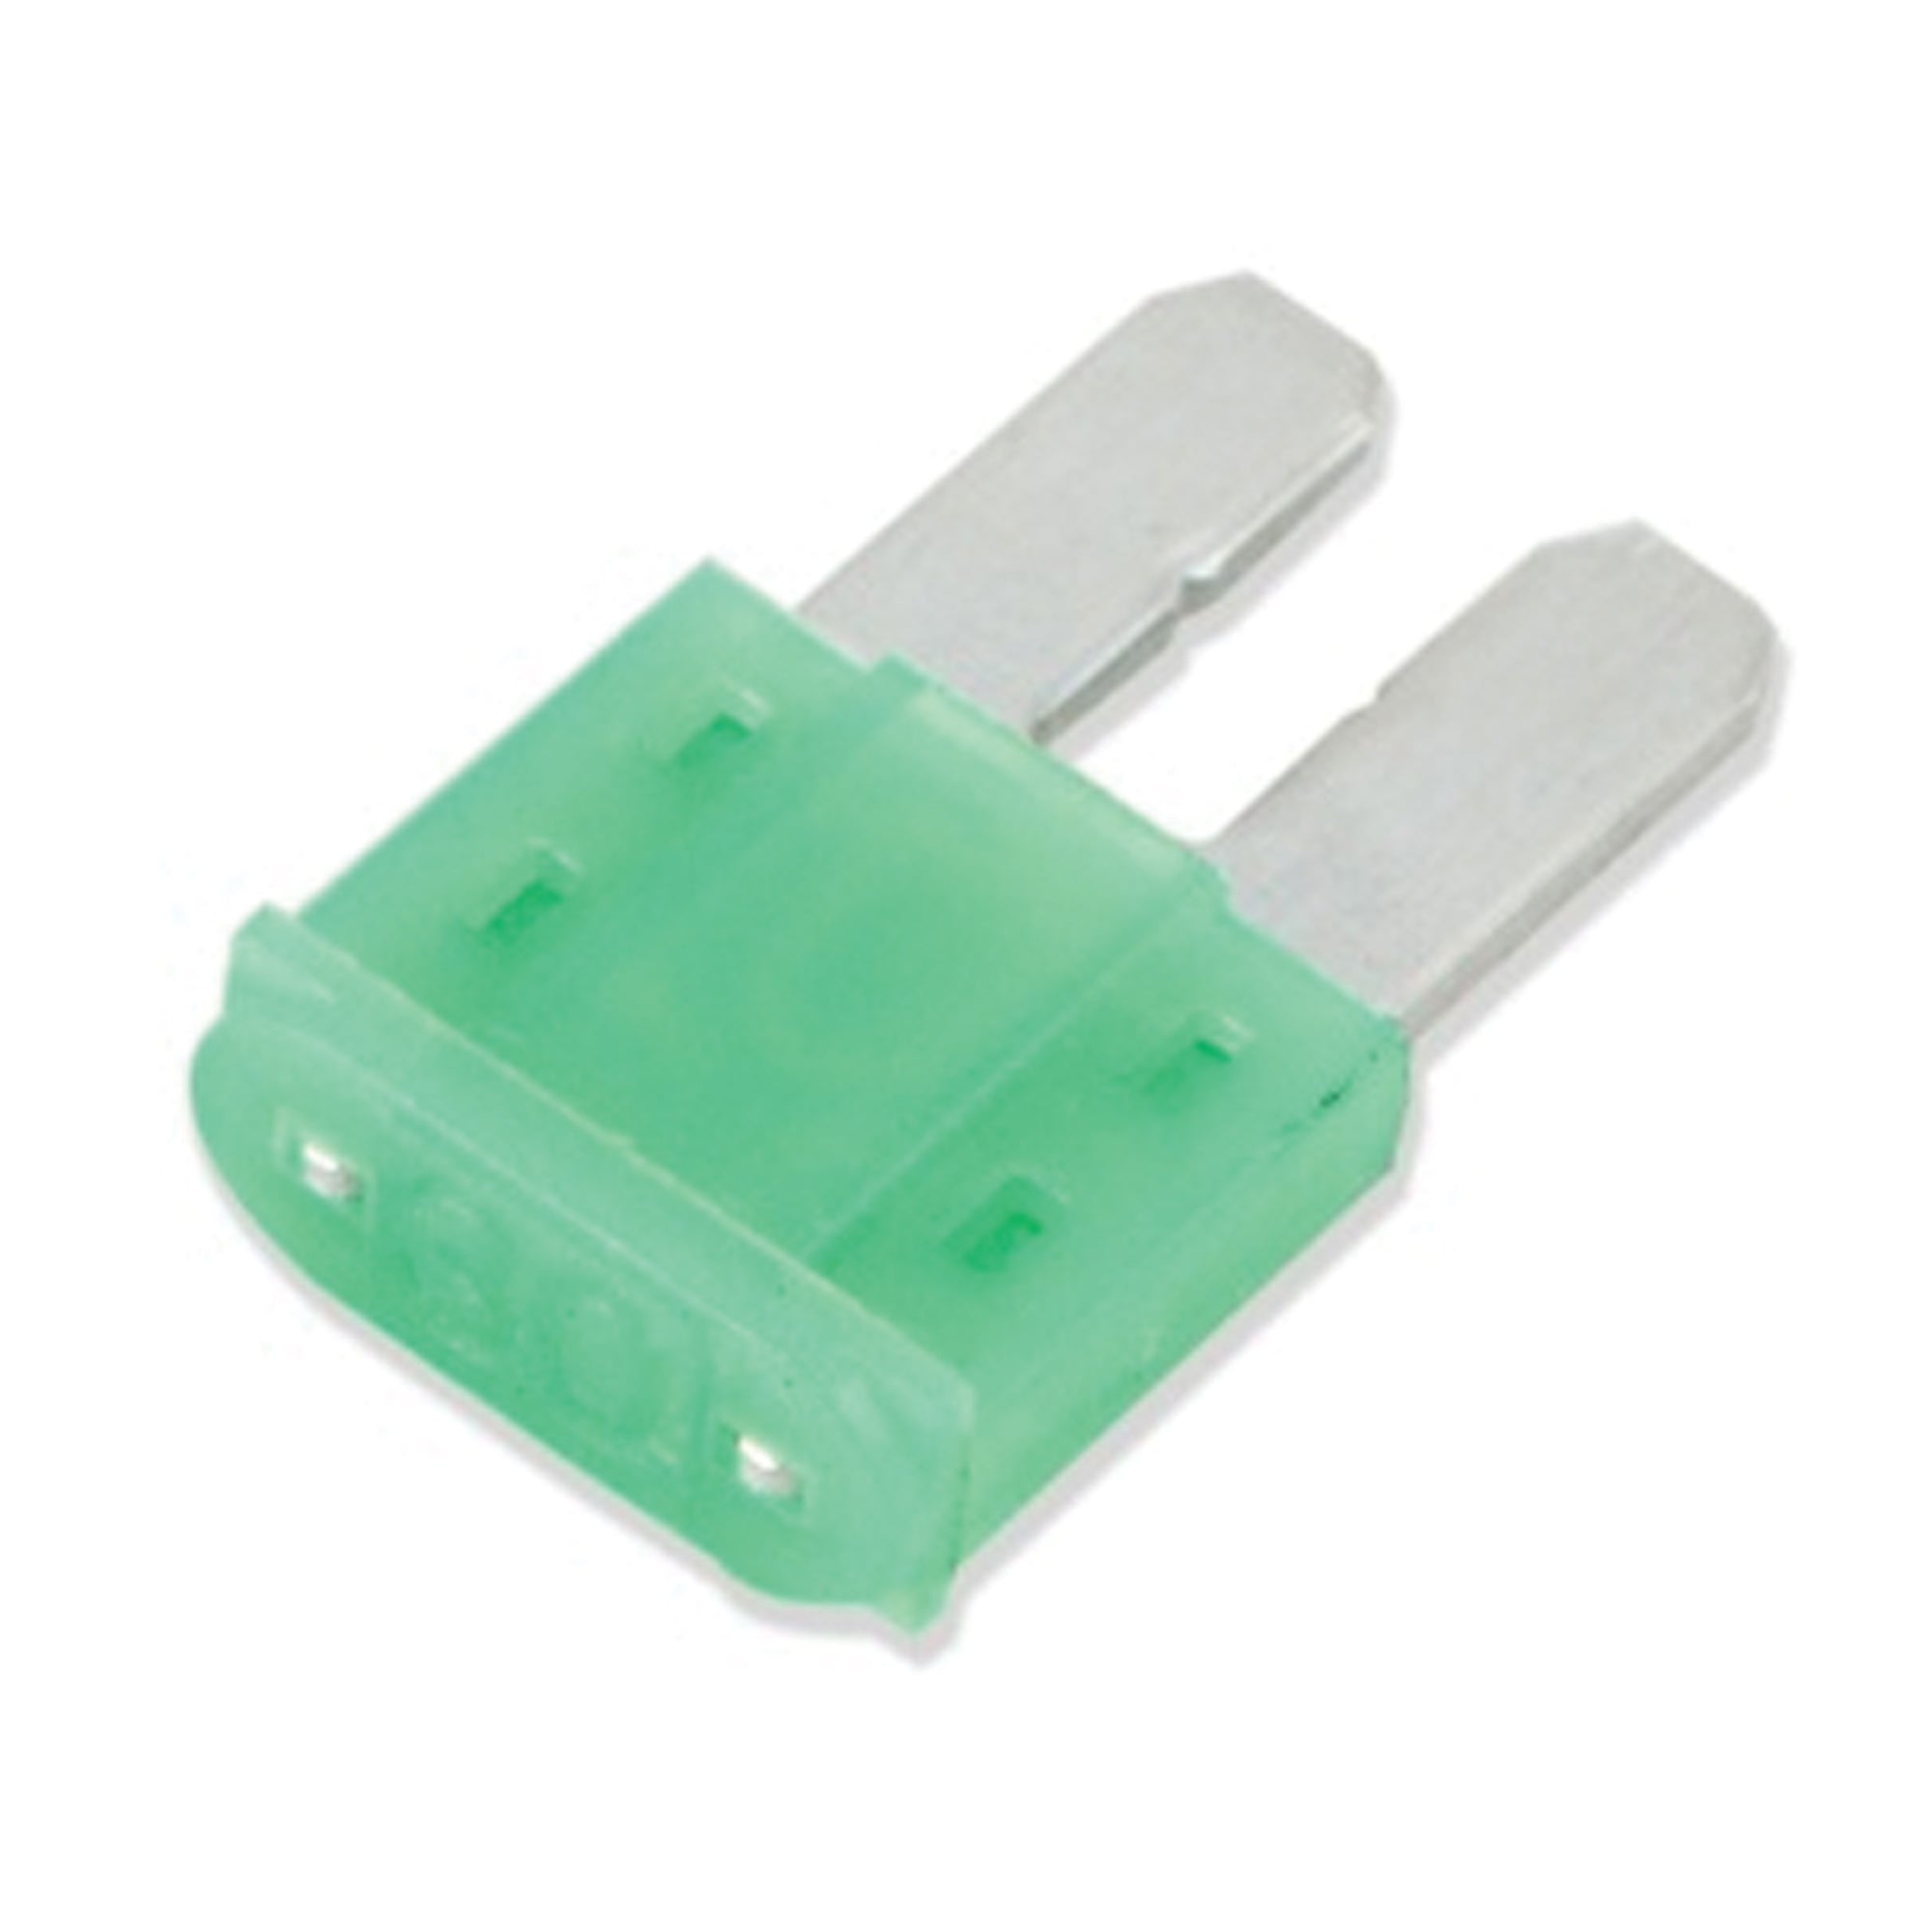 WirthCo 24830 MinBlade2 Fuse - 30 Amp (Green), 5-Pack